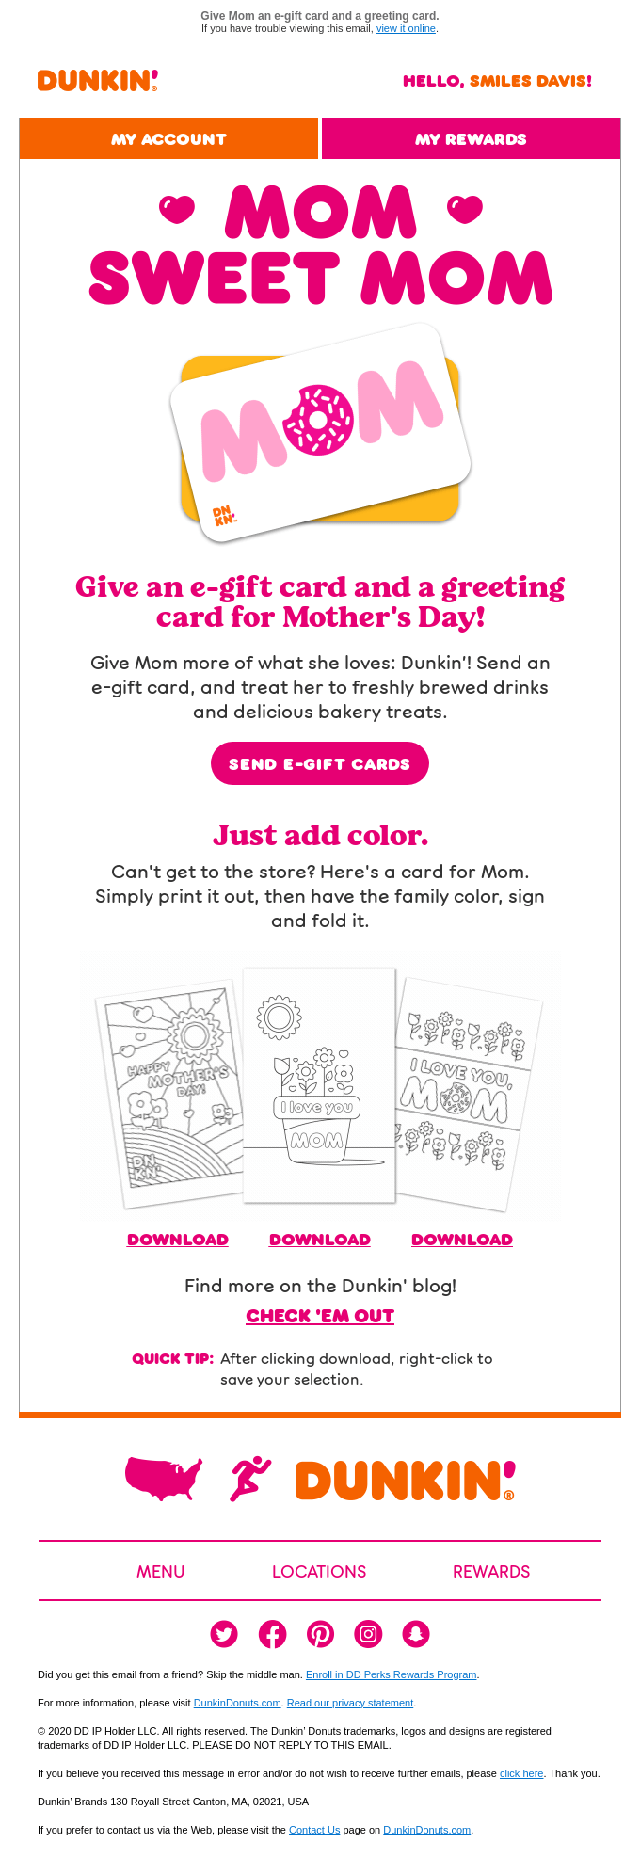 Dunkin Donuts _mother's day email